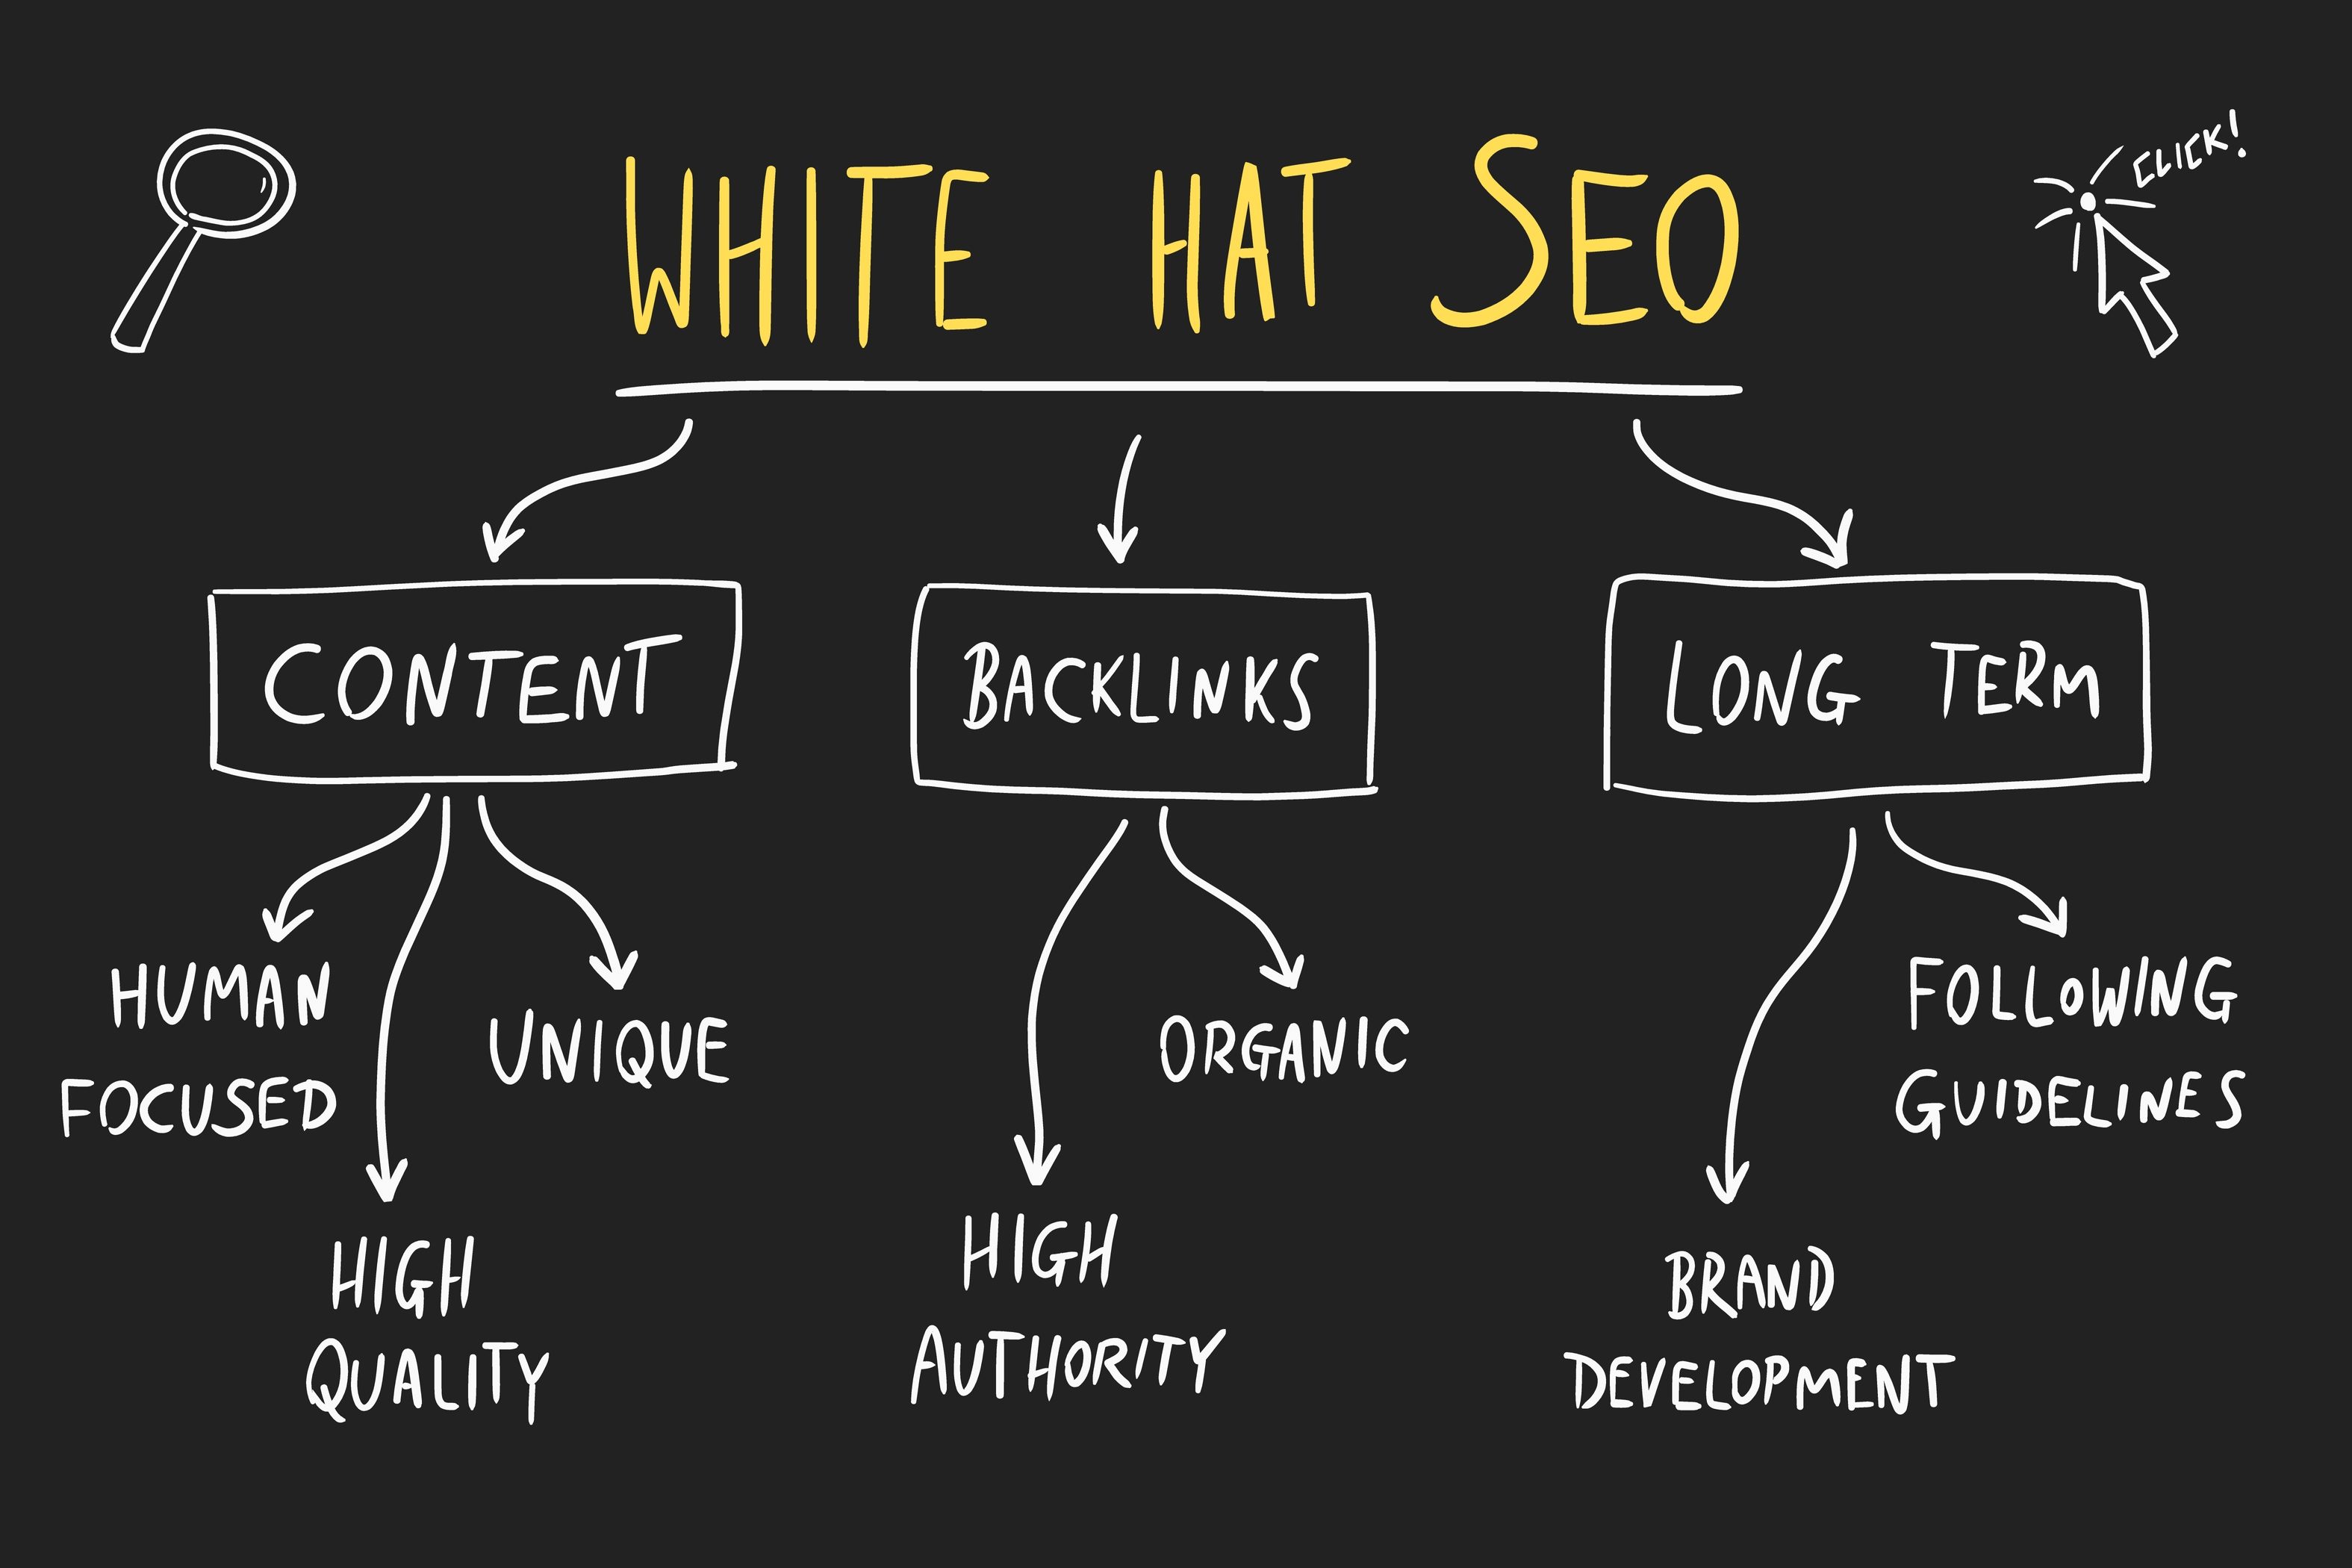 white hat seo_SEO marketing chart. White hat SEO - legal and ethical digital marketing strategies. Online business vector